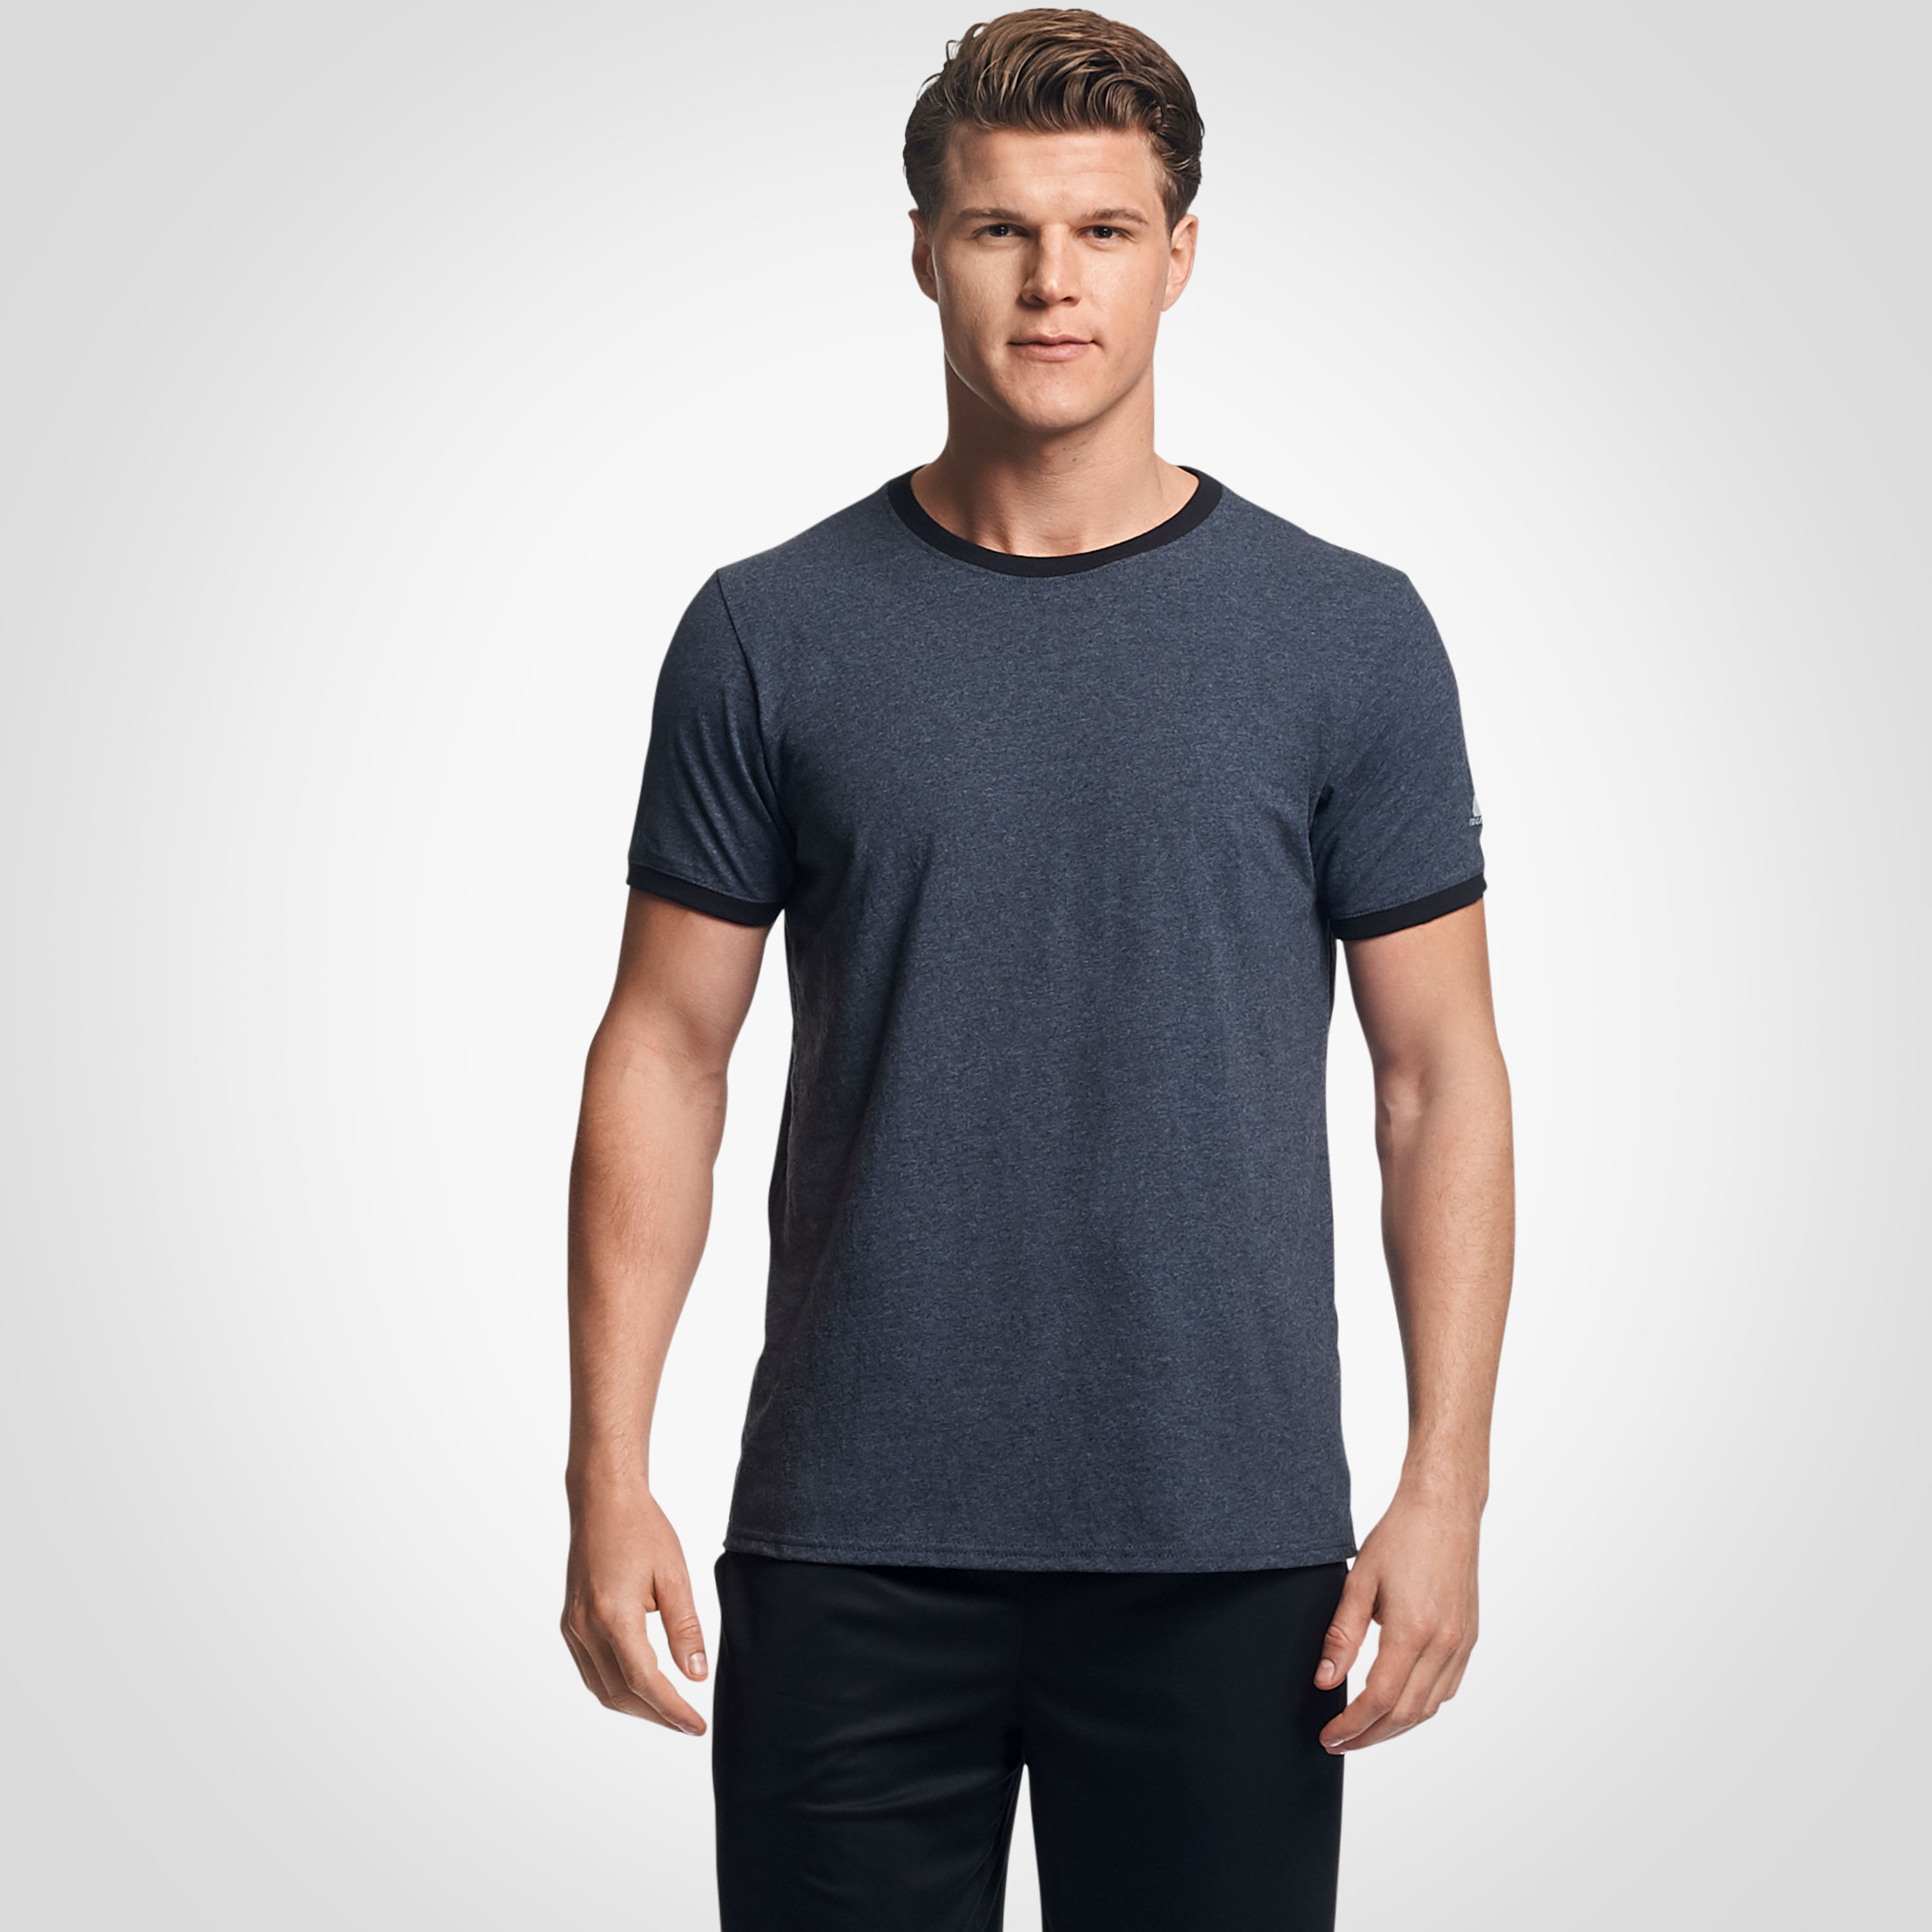 athletic fit shirts